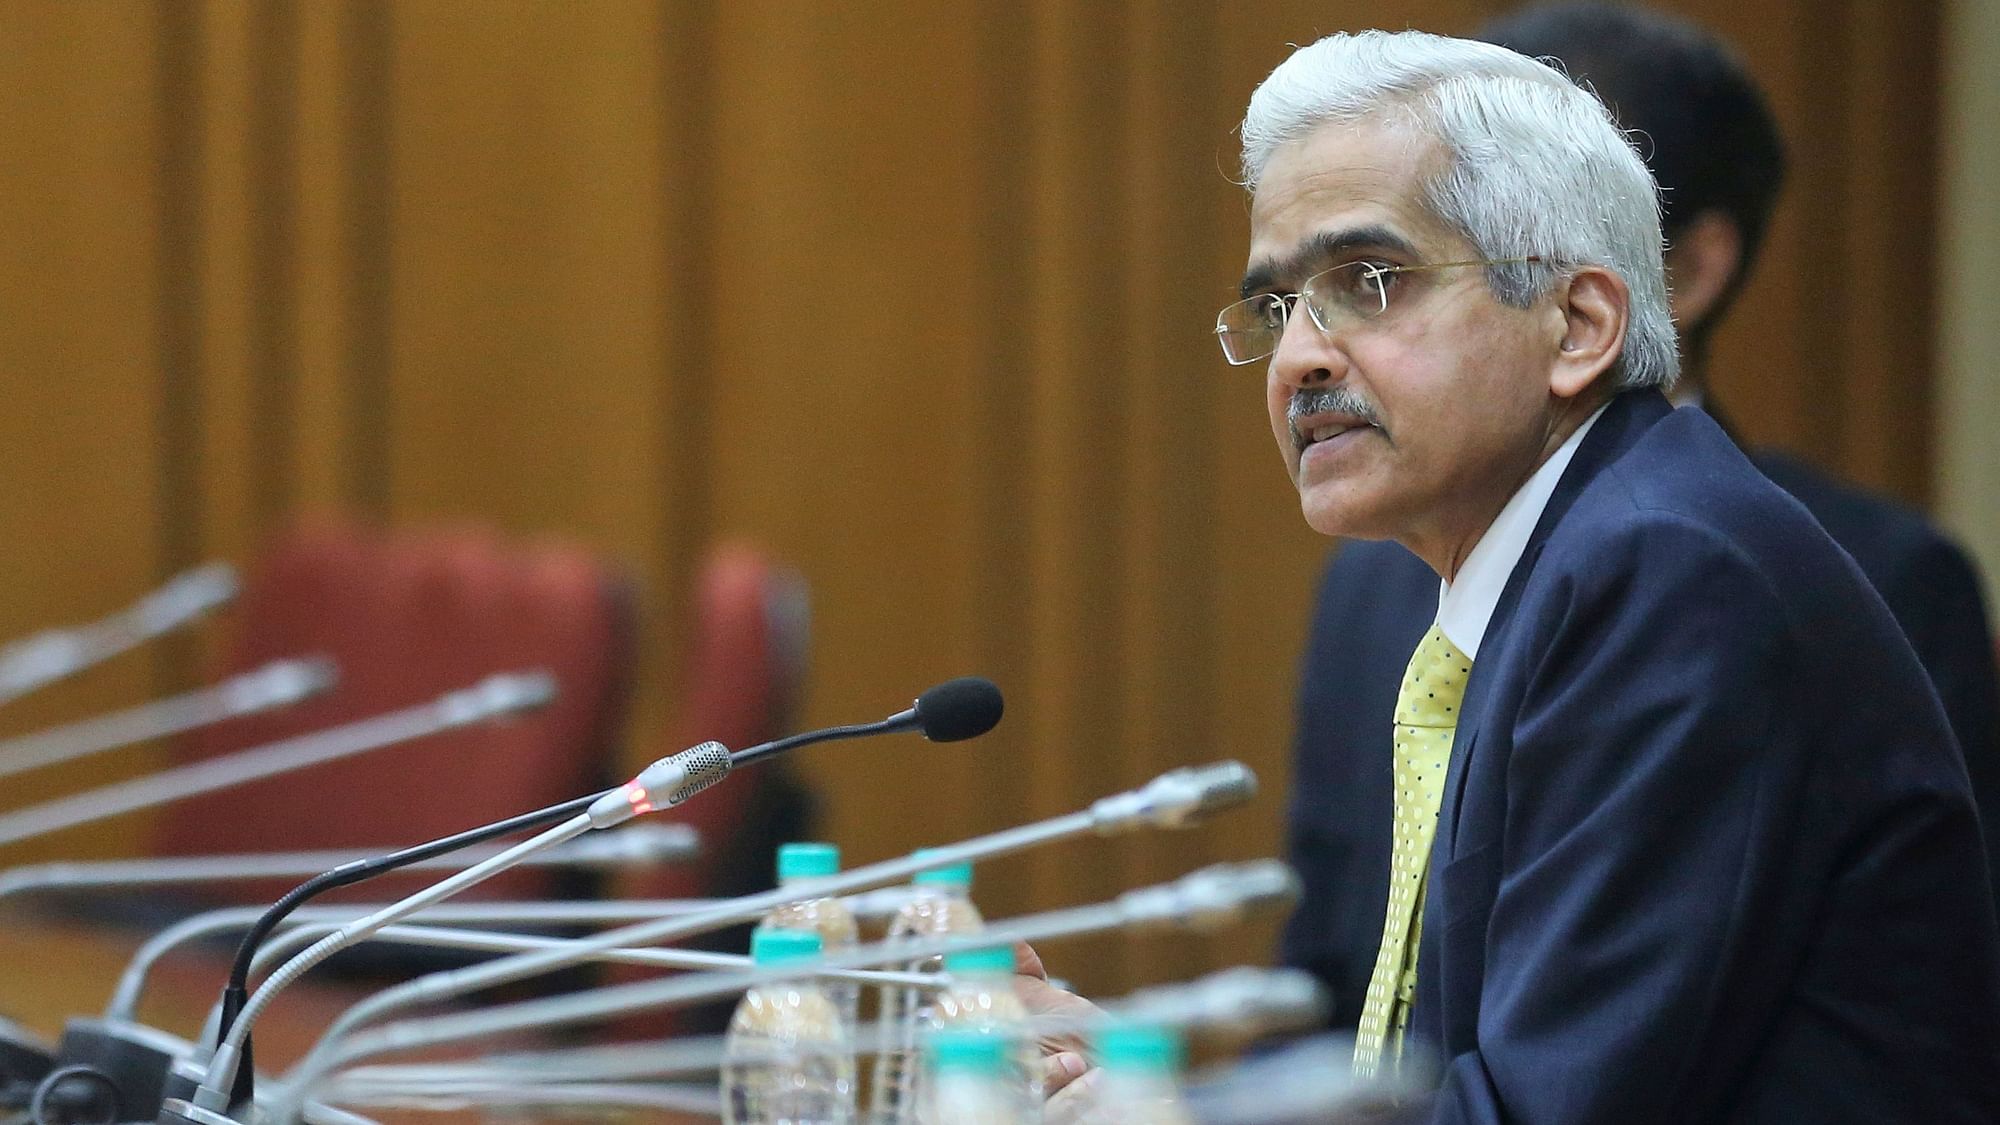 Reserve Bank of India’s Governor Shaktikanta Das sits for a press conference at the RBI headquarters in Mumbai. File photo.